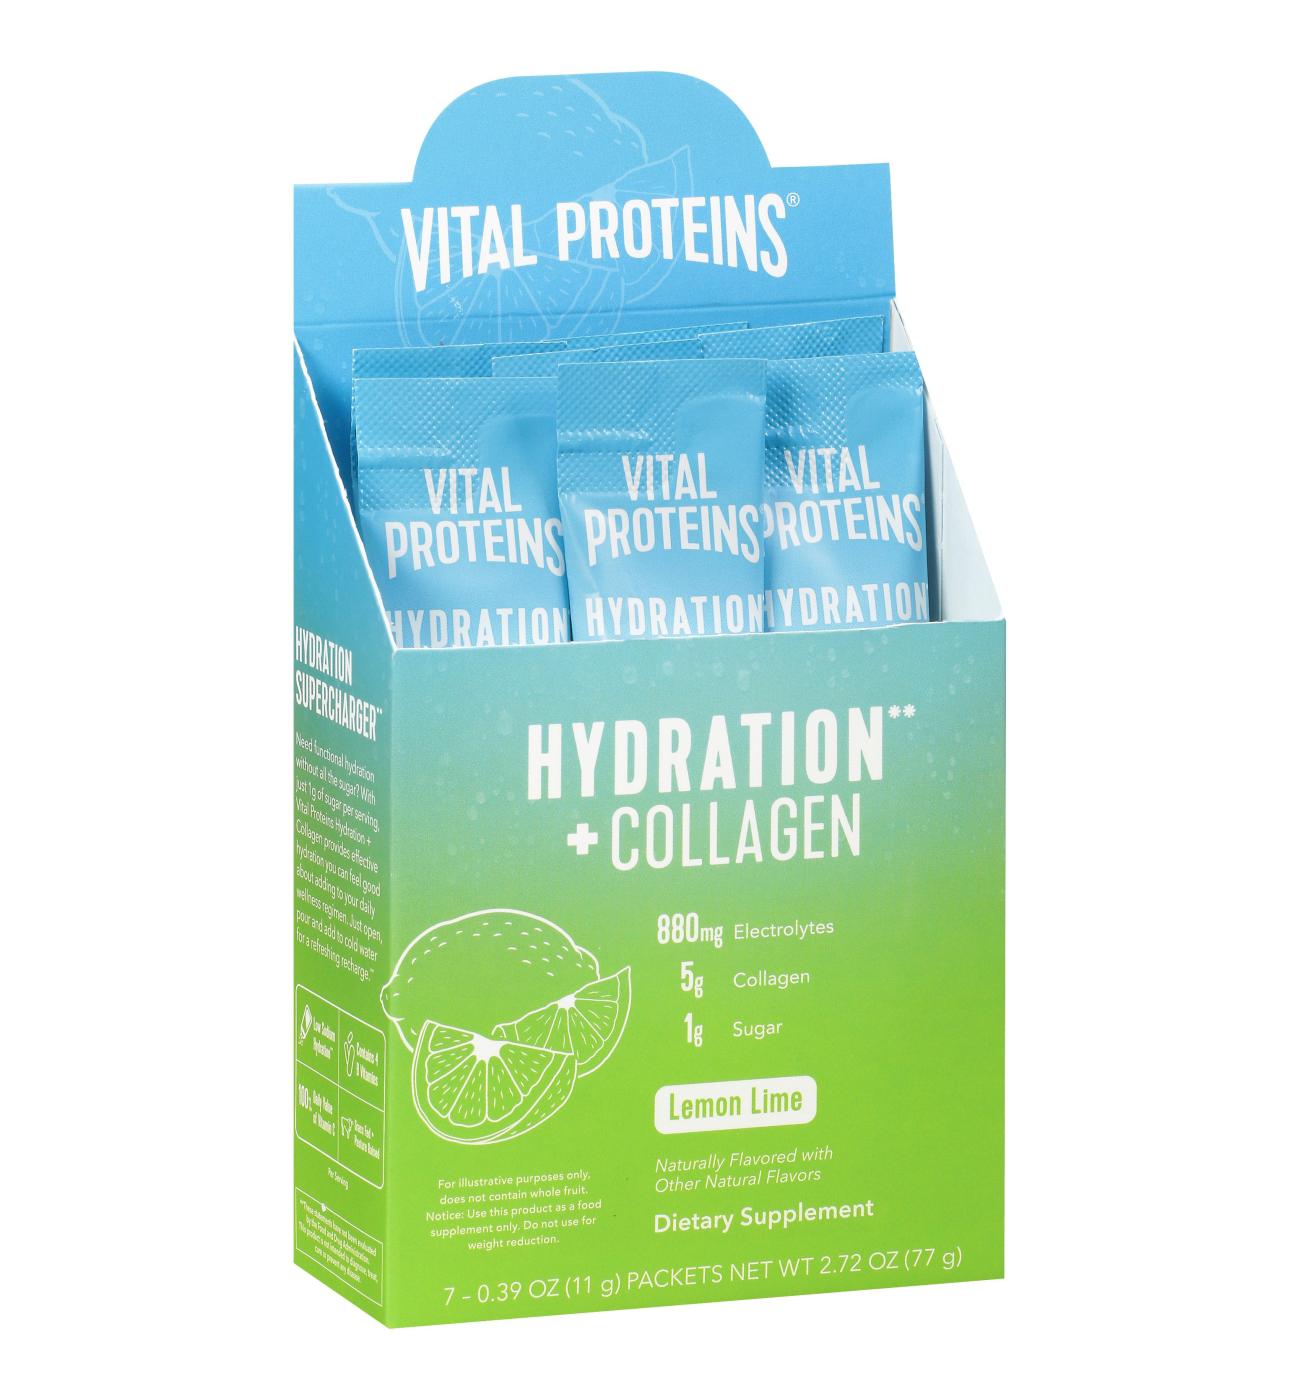 Vital Proteins Hydration + Collagen Lemon Lime Packets; image 2 of 2